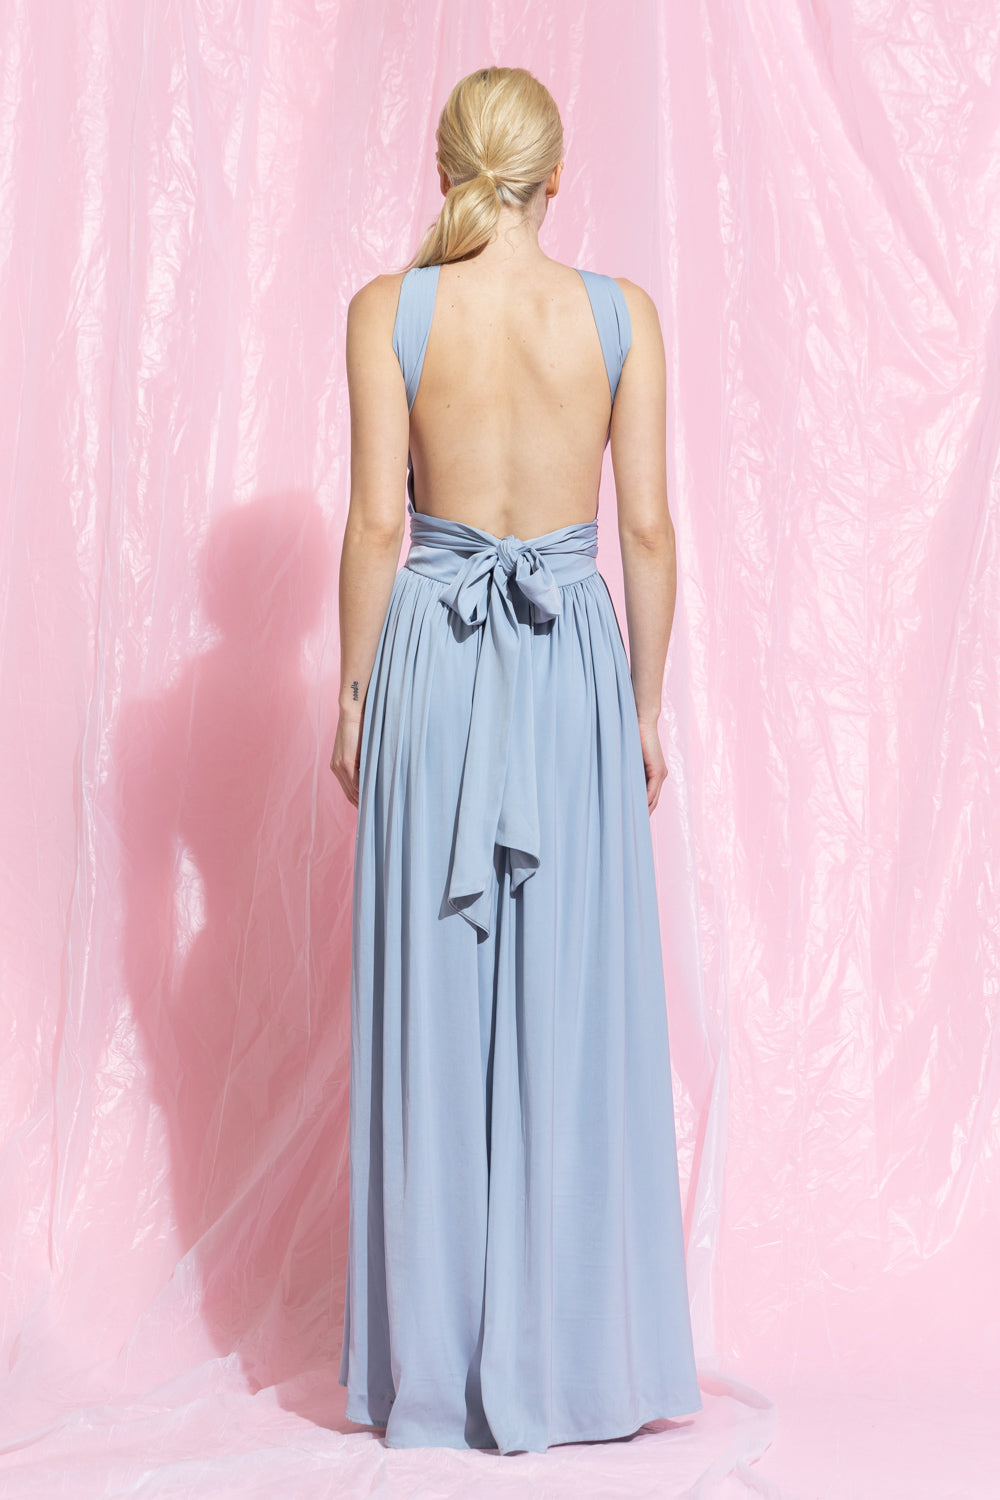 Icy Blue Halter Gown